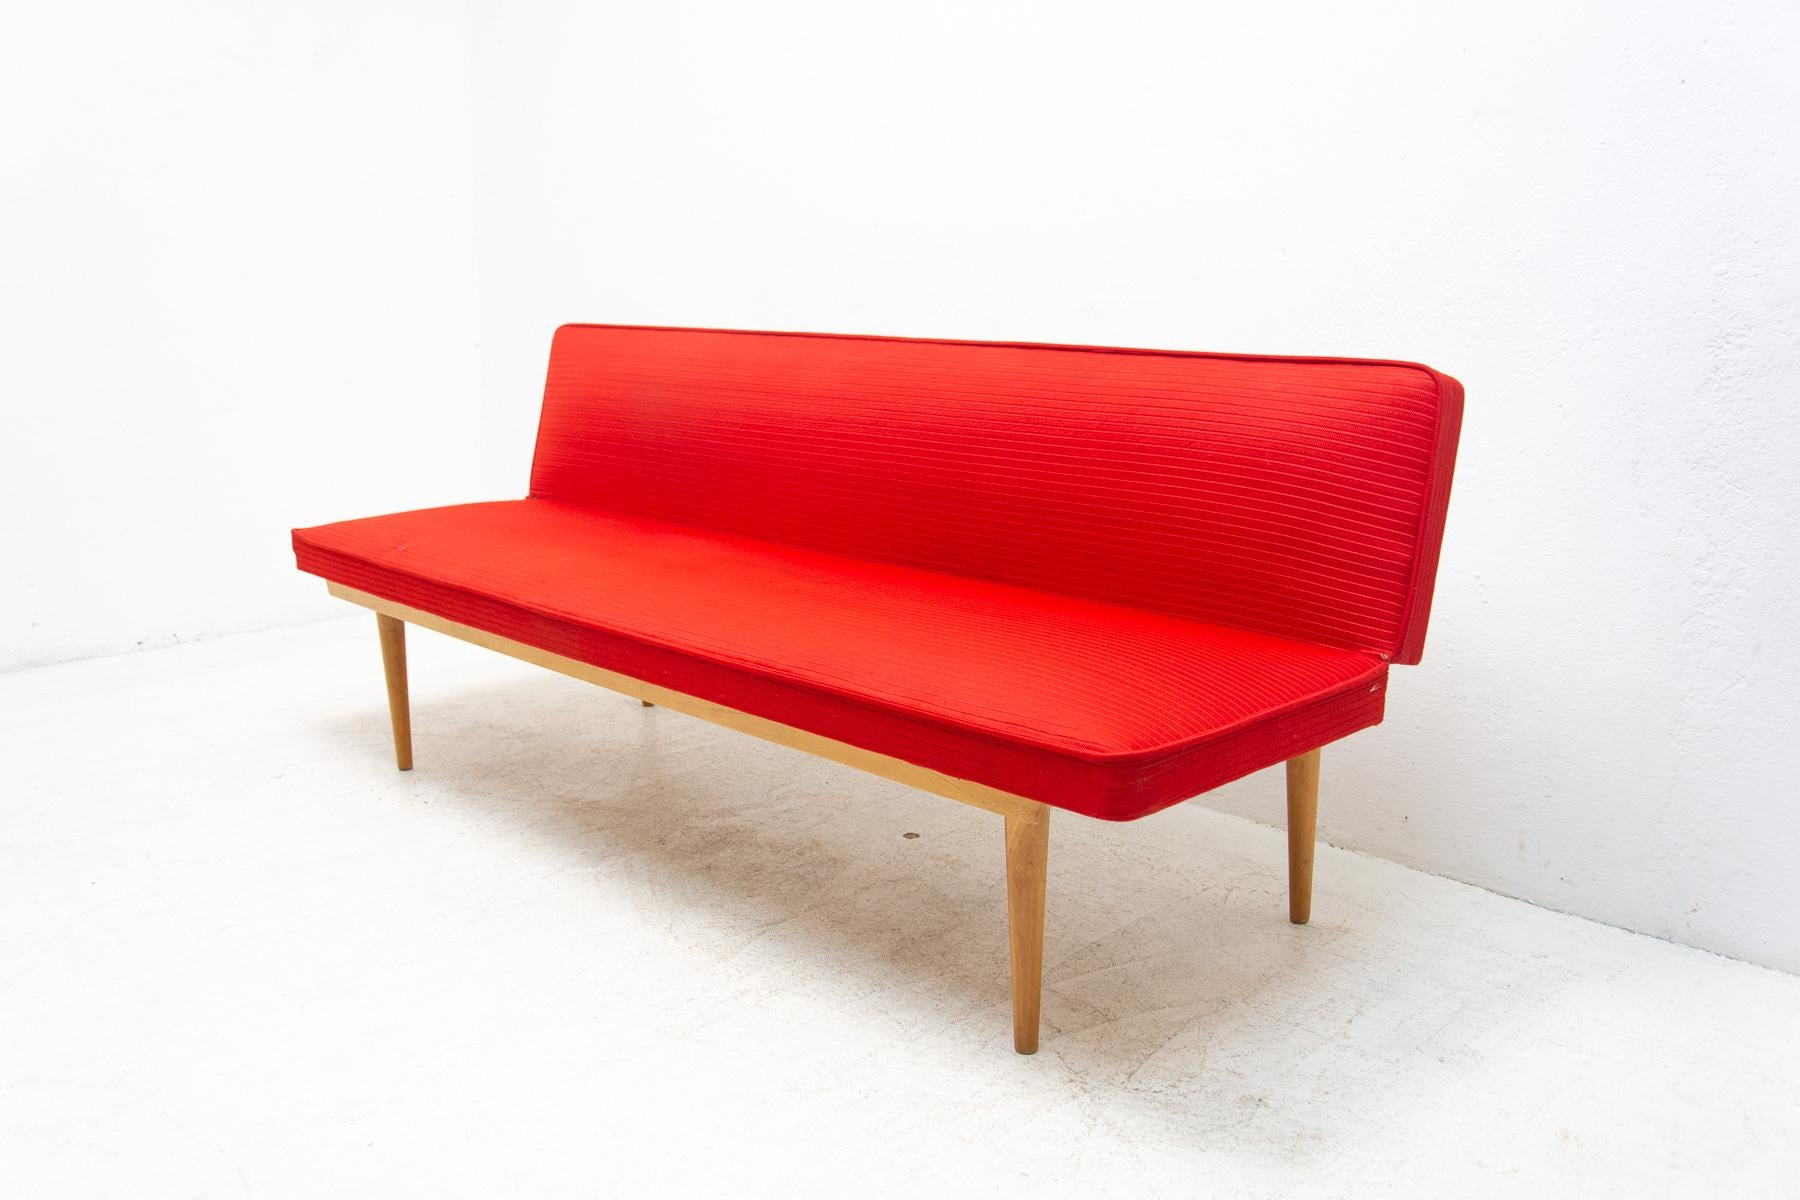 Mid century sofa/daybed, made in the former Czechoslovakia in the 1960´s, designed by Miroslav Navrátil. Material: beech wood, fabric. The sofa is in very good Vintage condition, the fabric has been sewn in one place in the past, but it´s almost